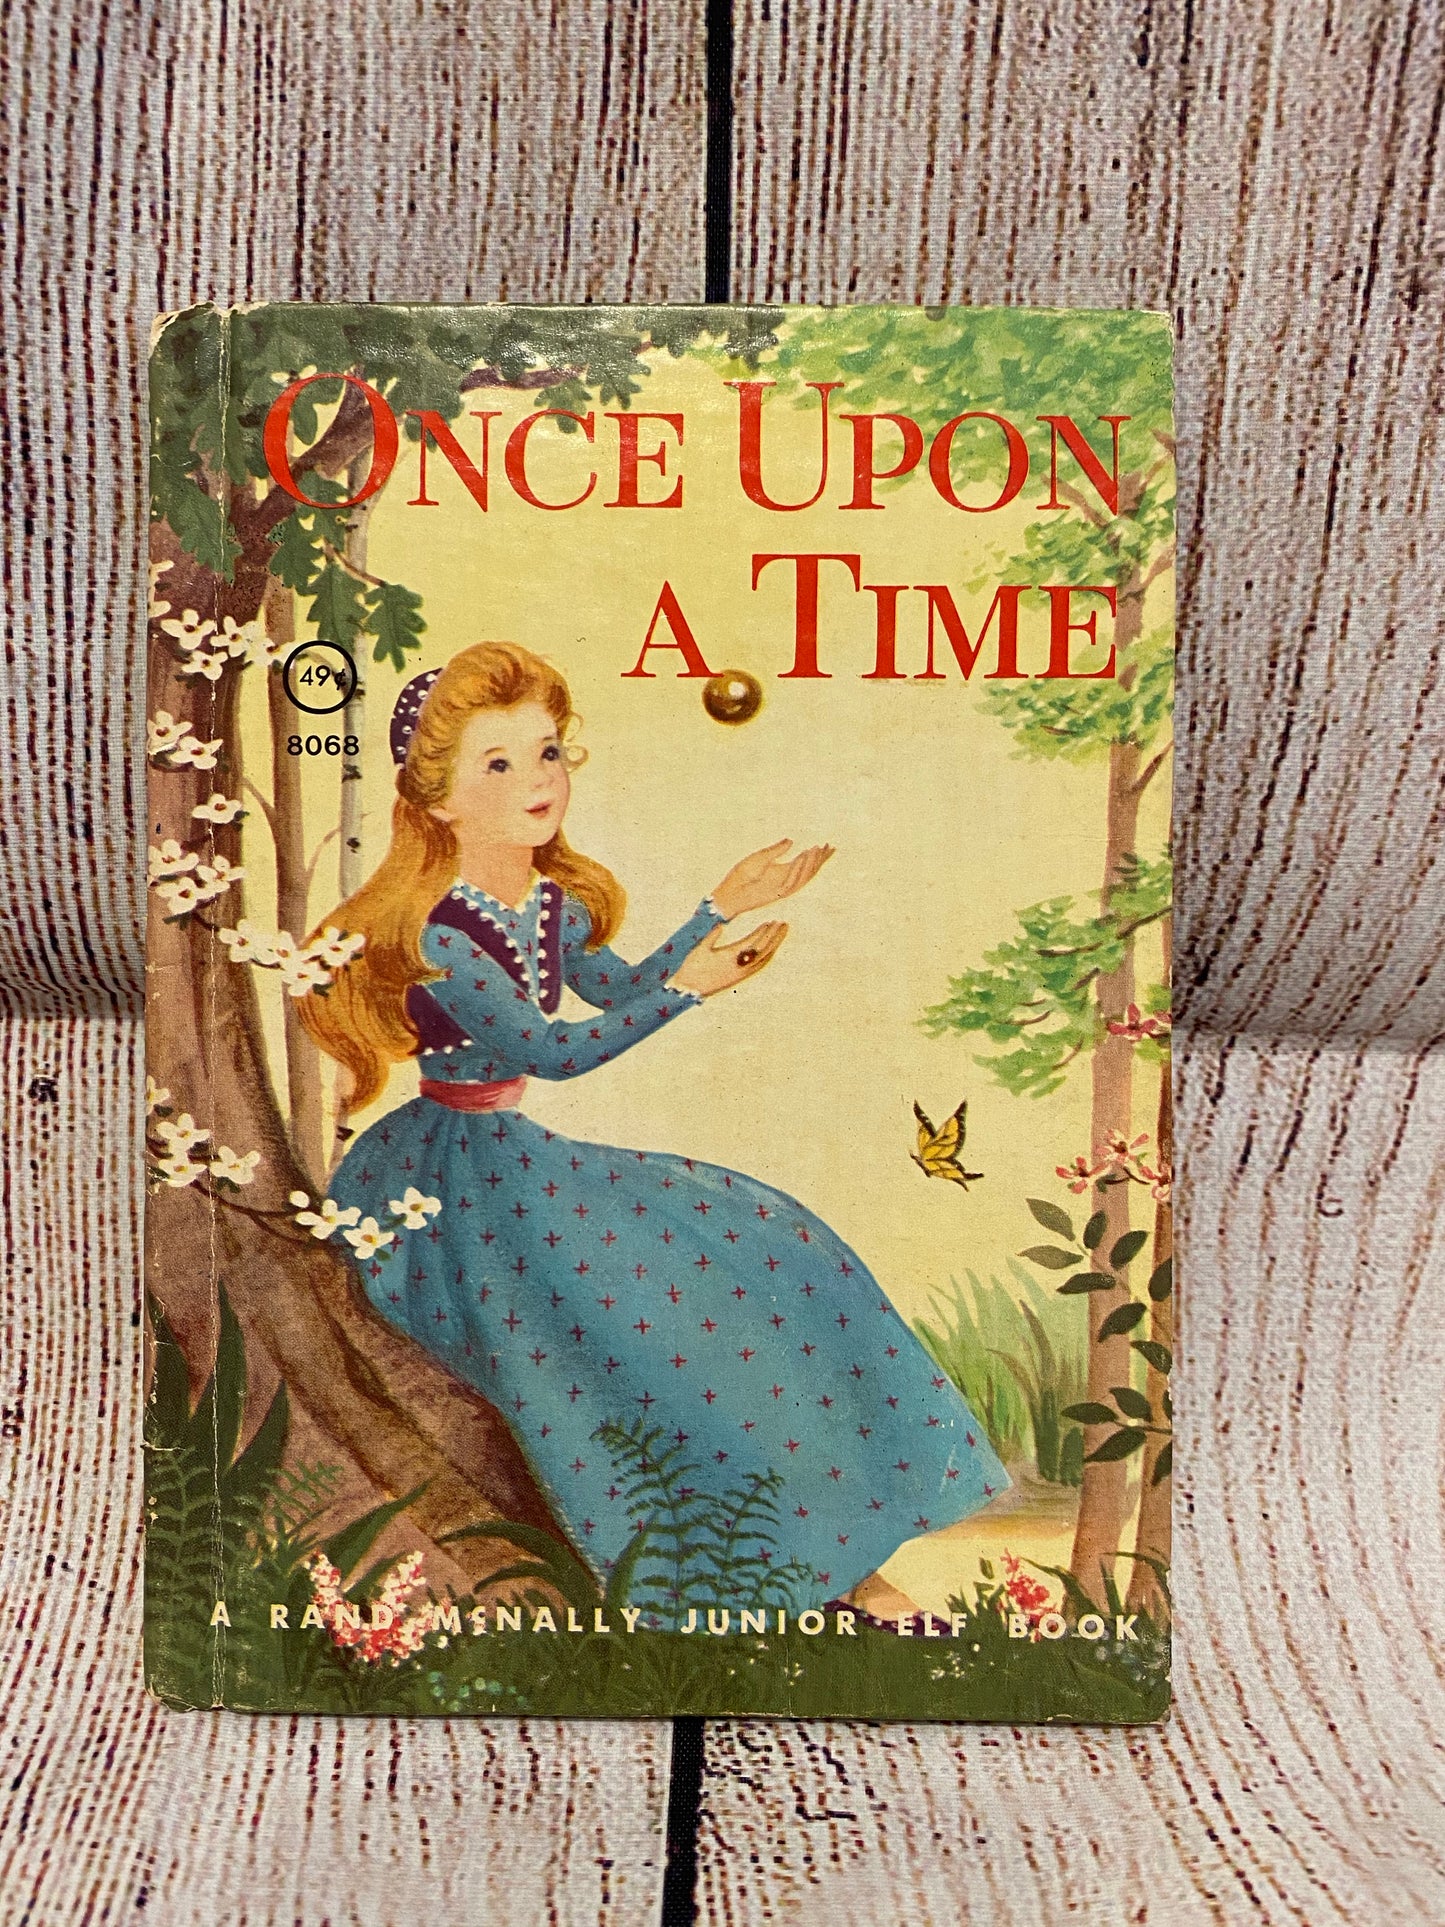 Once Upon A Time - Story of the Frog Prince Illustrated by Elizabeth Webbe